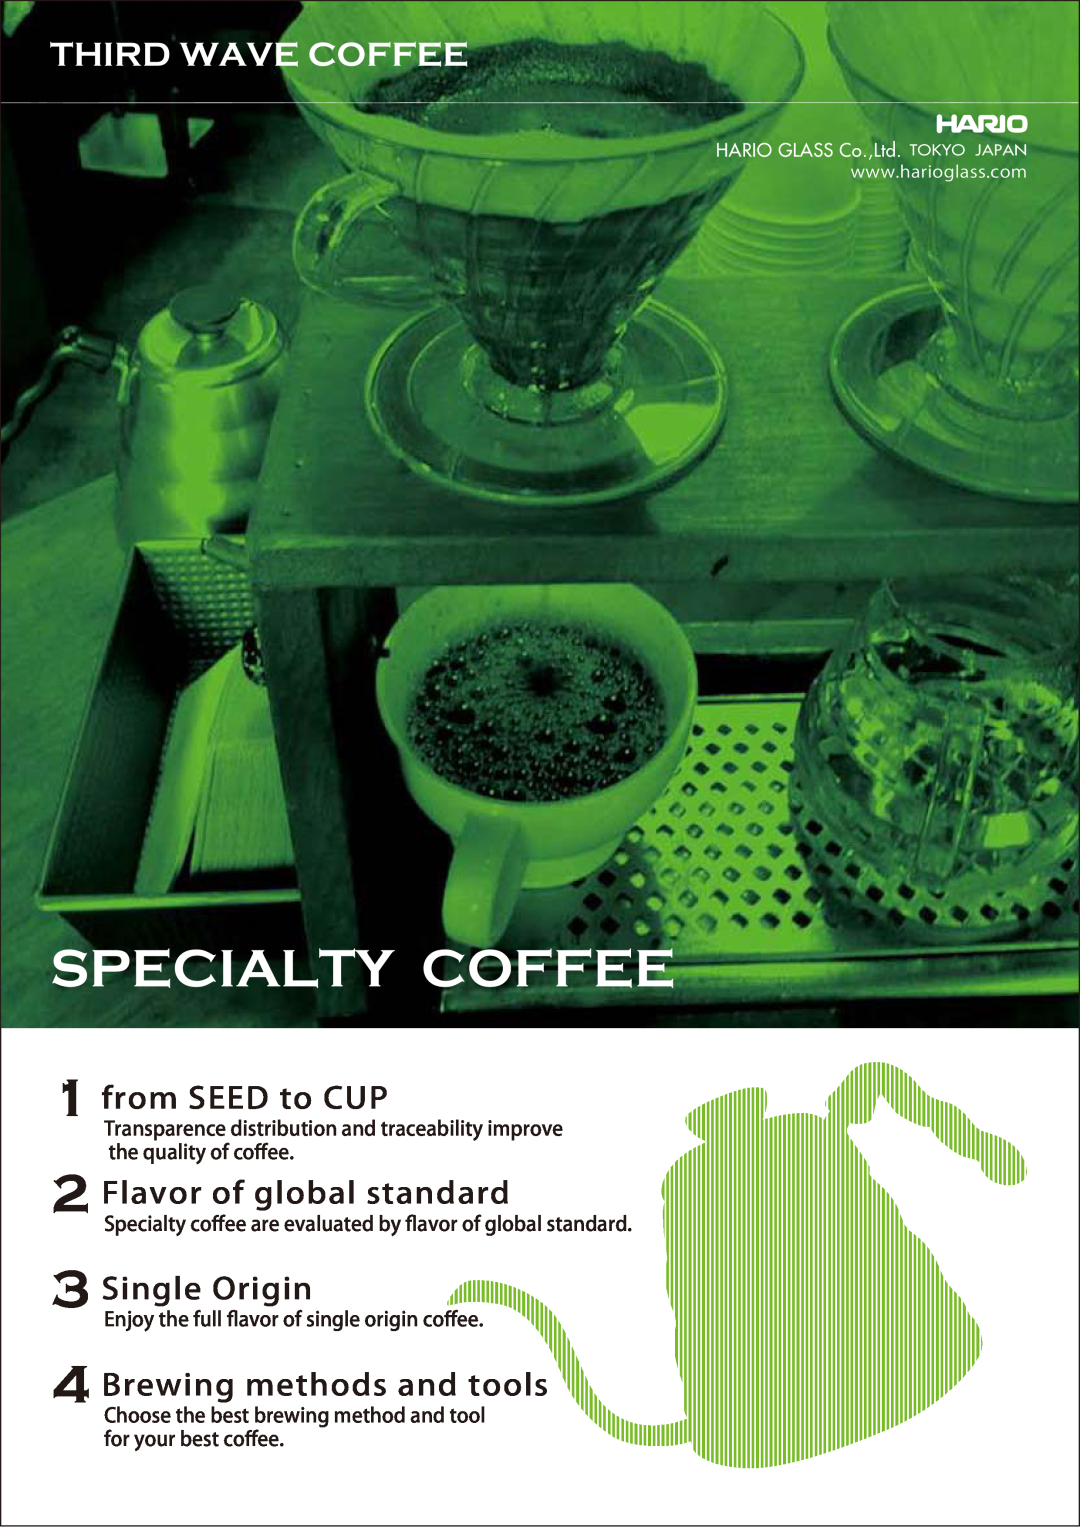 Hario Glass NXA-5 manual SpecialtyCoffee, Third Wave Coffee, from SEED to CUP, Flavor of global standard, Single Origin 